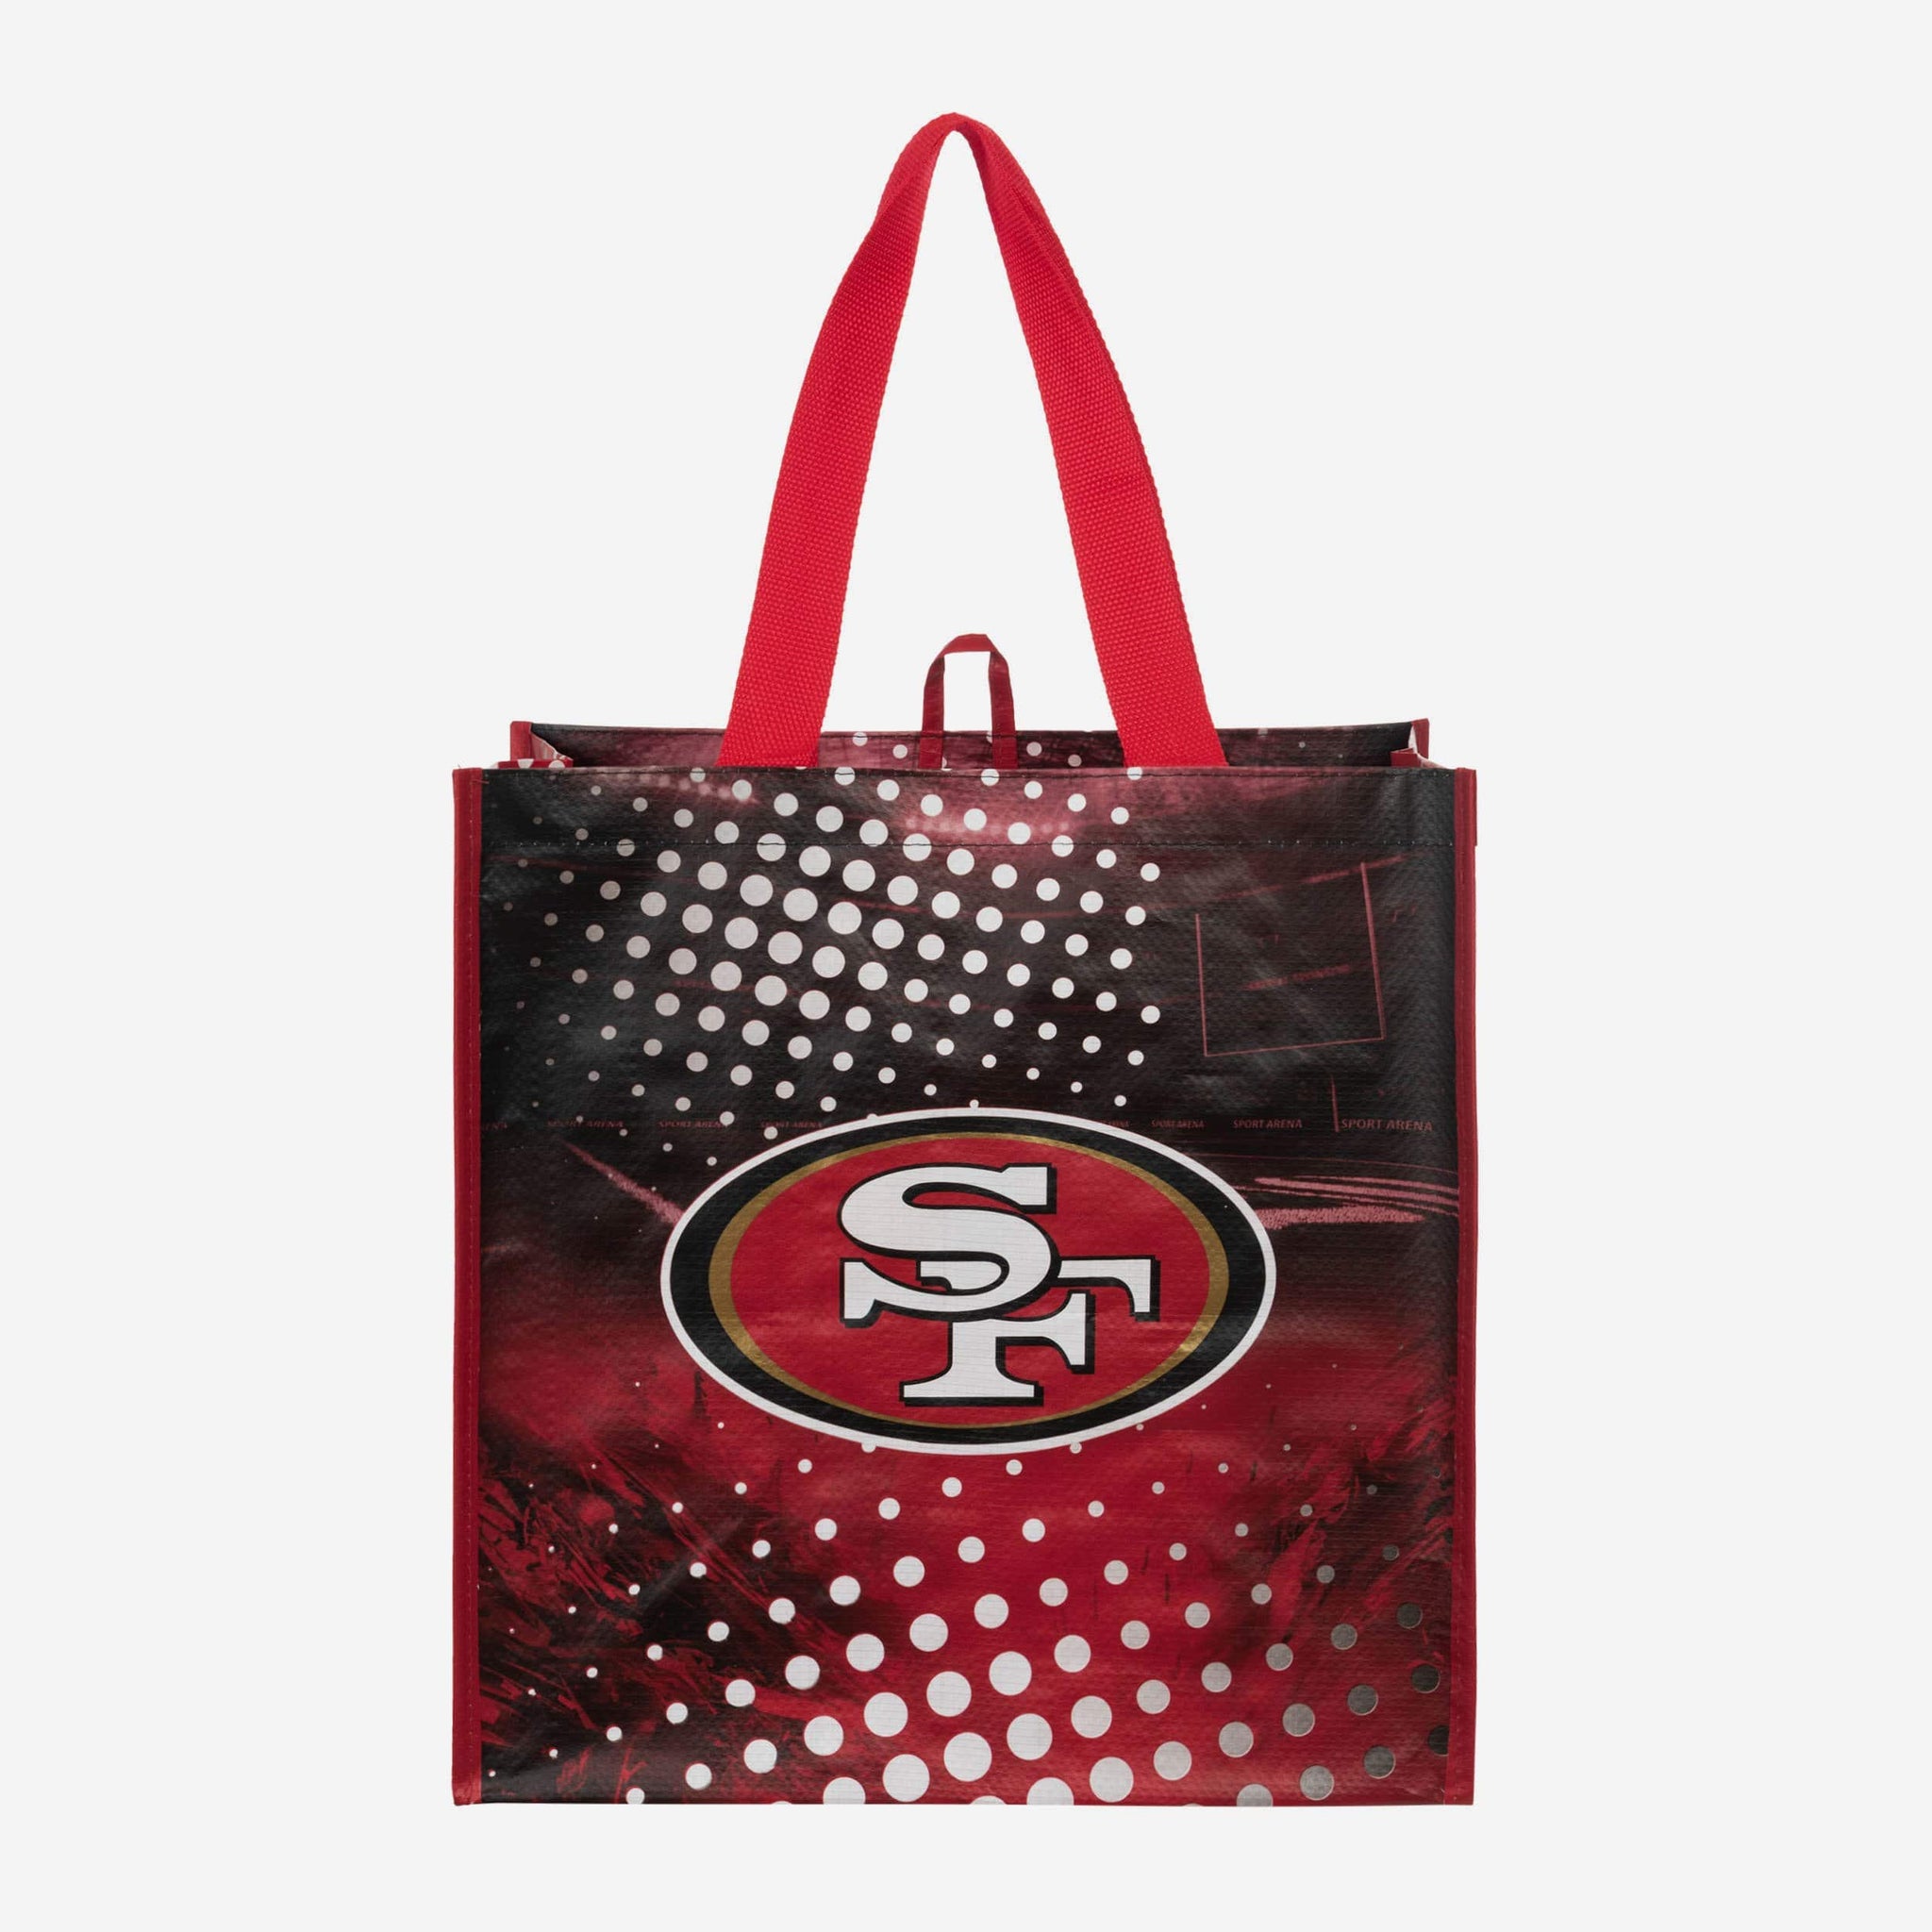 NFL Team Logo Reusable St. Louis Rams Grocery Tote Shopping Bag